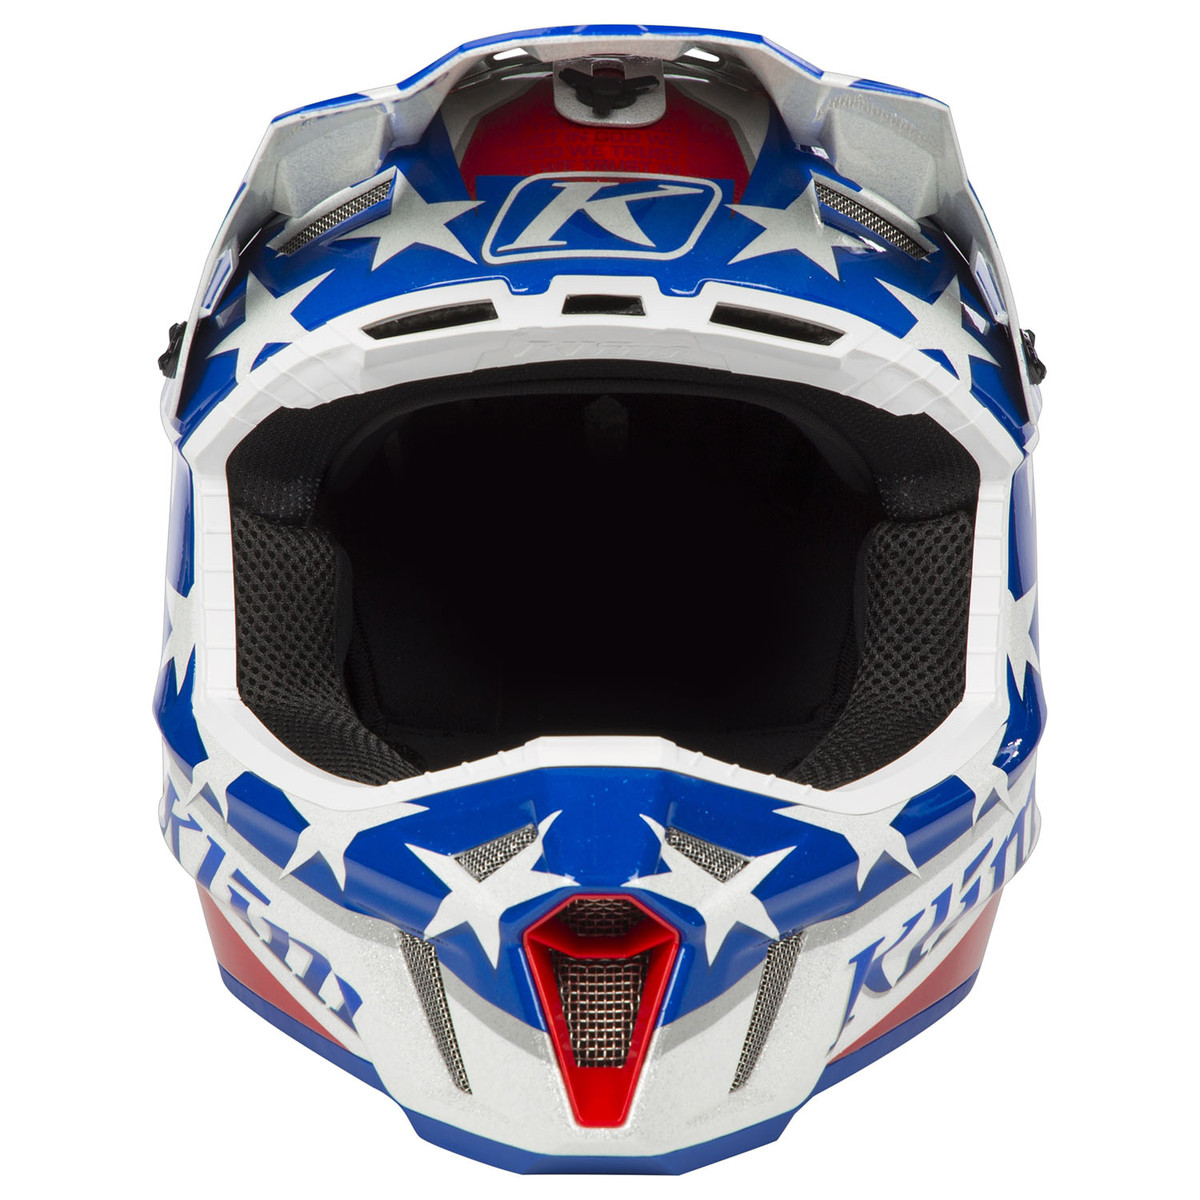 Viewing Images For Klim F3 Patriot 2.0 Helmet (Small Only) :: MotorcycleGear.com